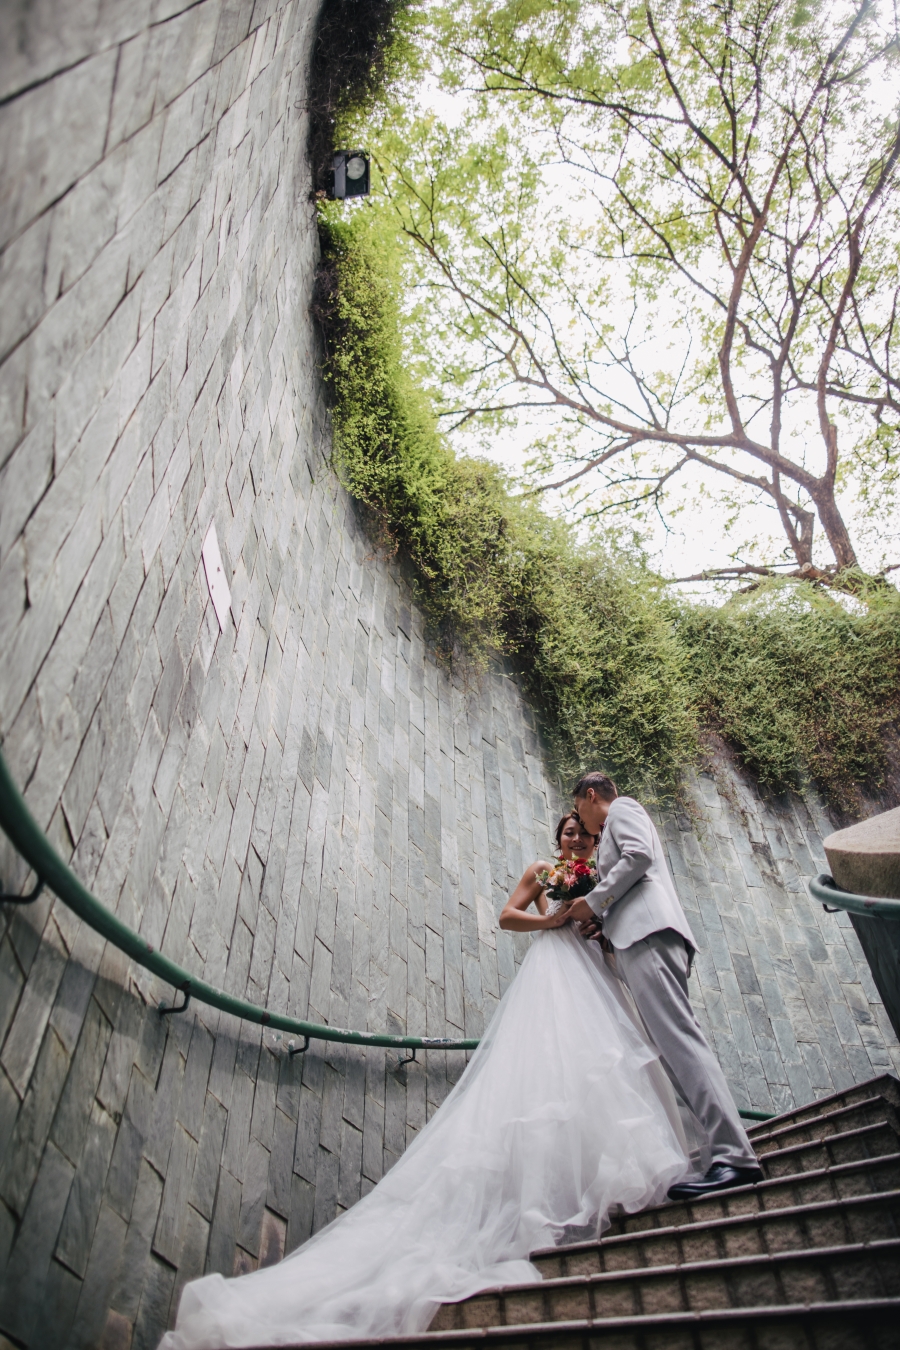 Singapore Pre-Wedding Photoshoot At Gardens By The Bay - Cloud Forest And Night Shoot At Marina Bay Sands by Cheng on OneThreeOneFour 1